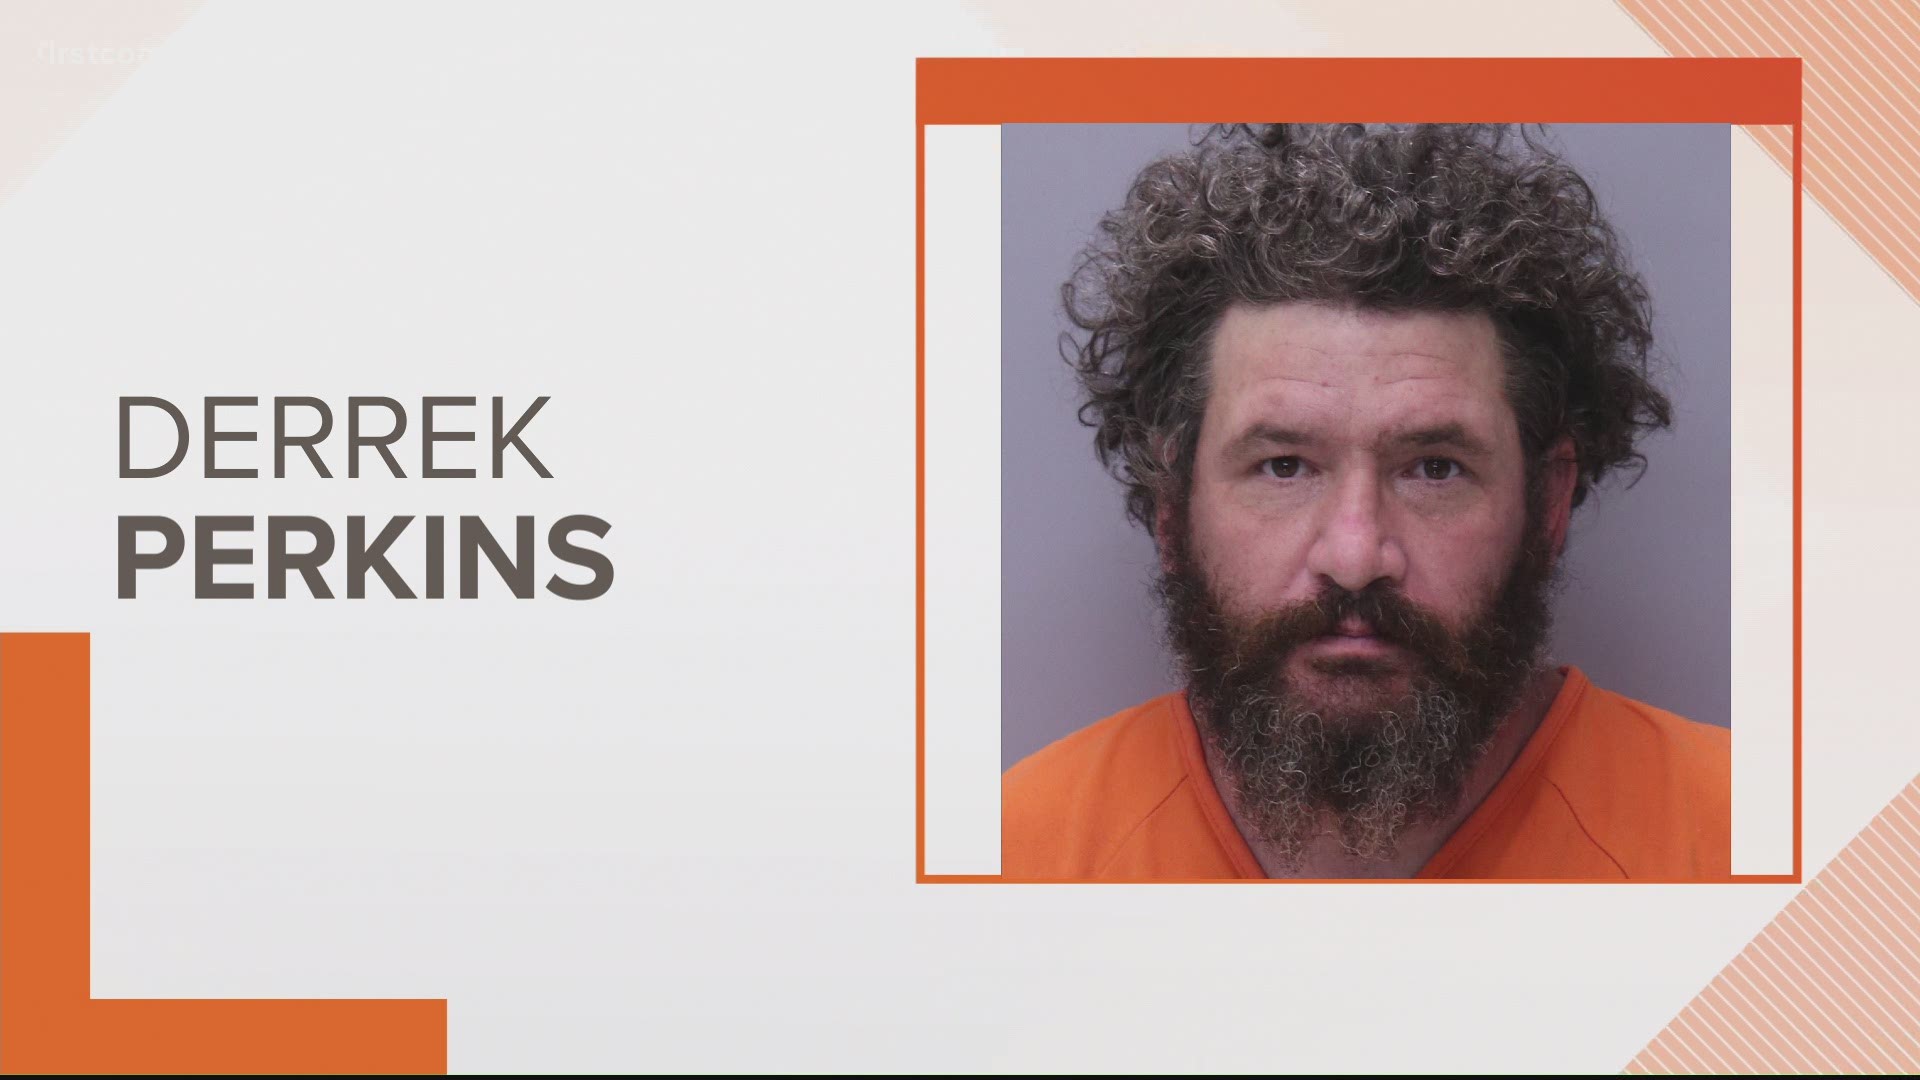 The St. Johns County Sheriff's Office says the victim had filed an injunction against Derrek Perkins after he tried to run them over, but was never served.